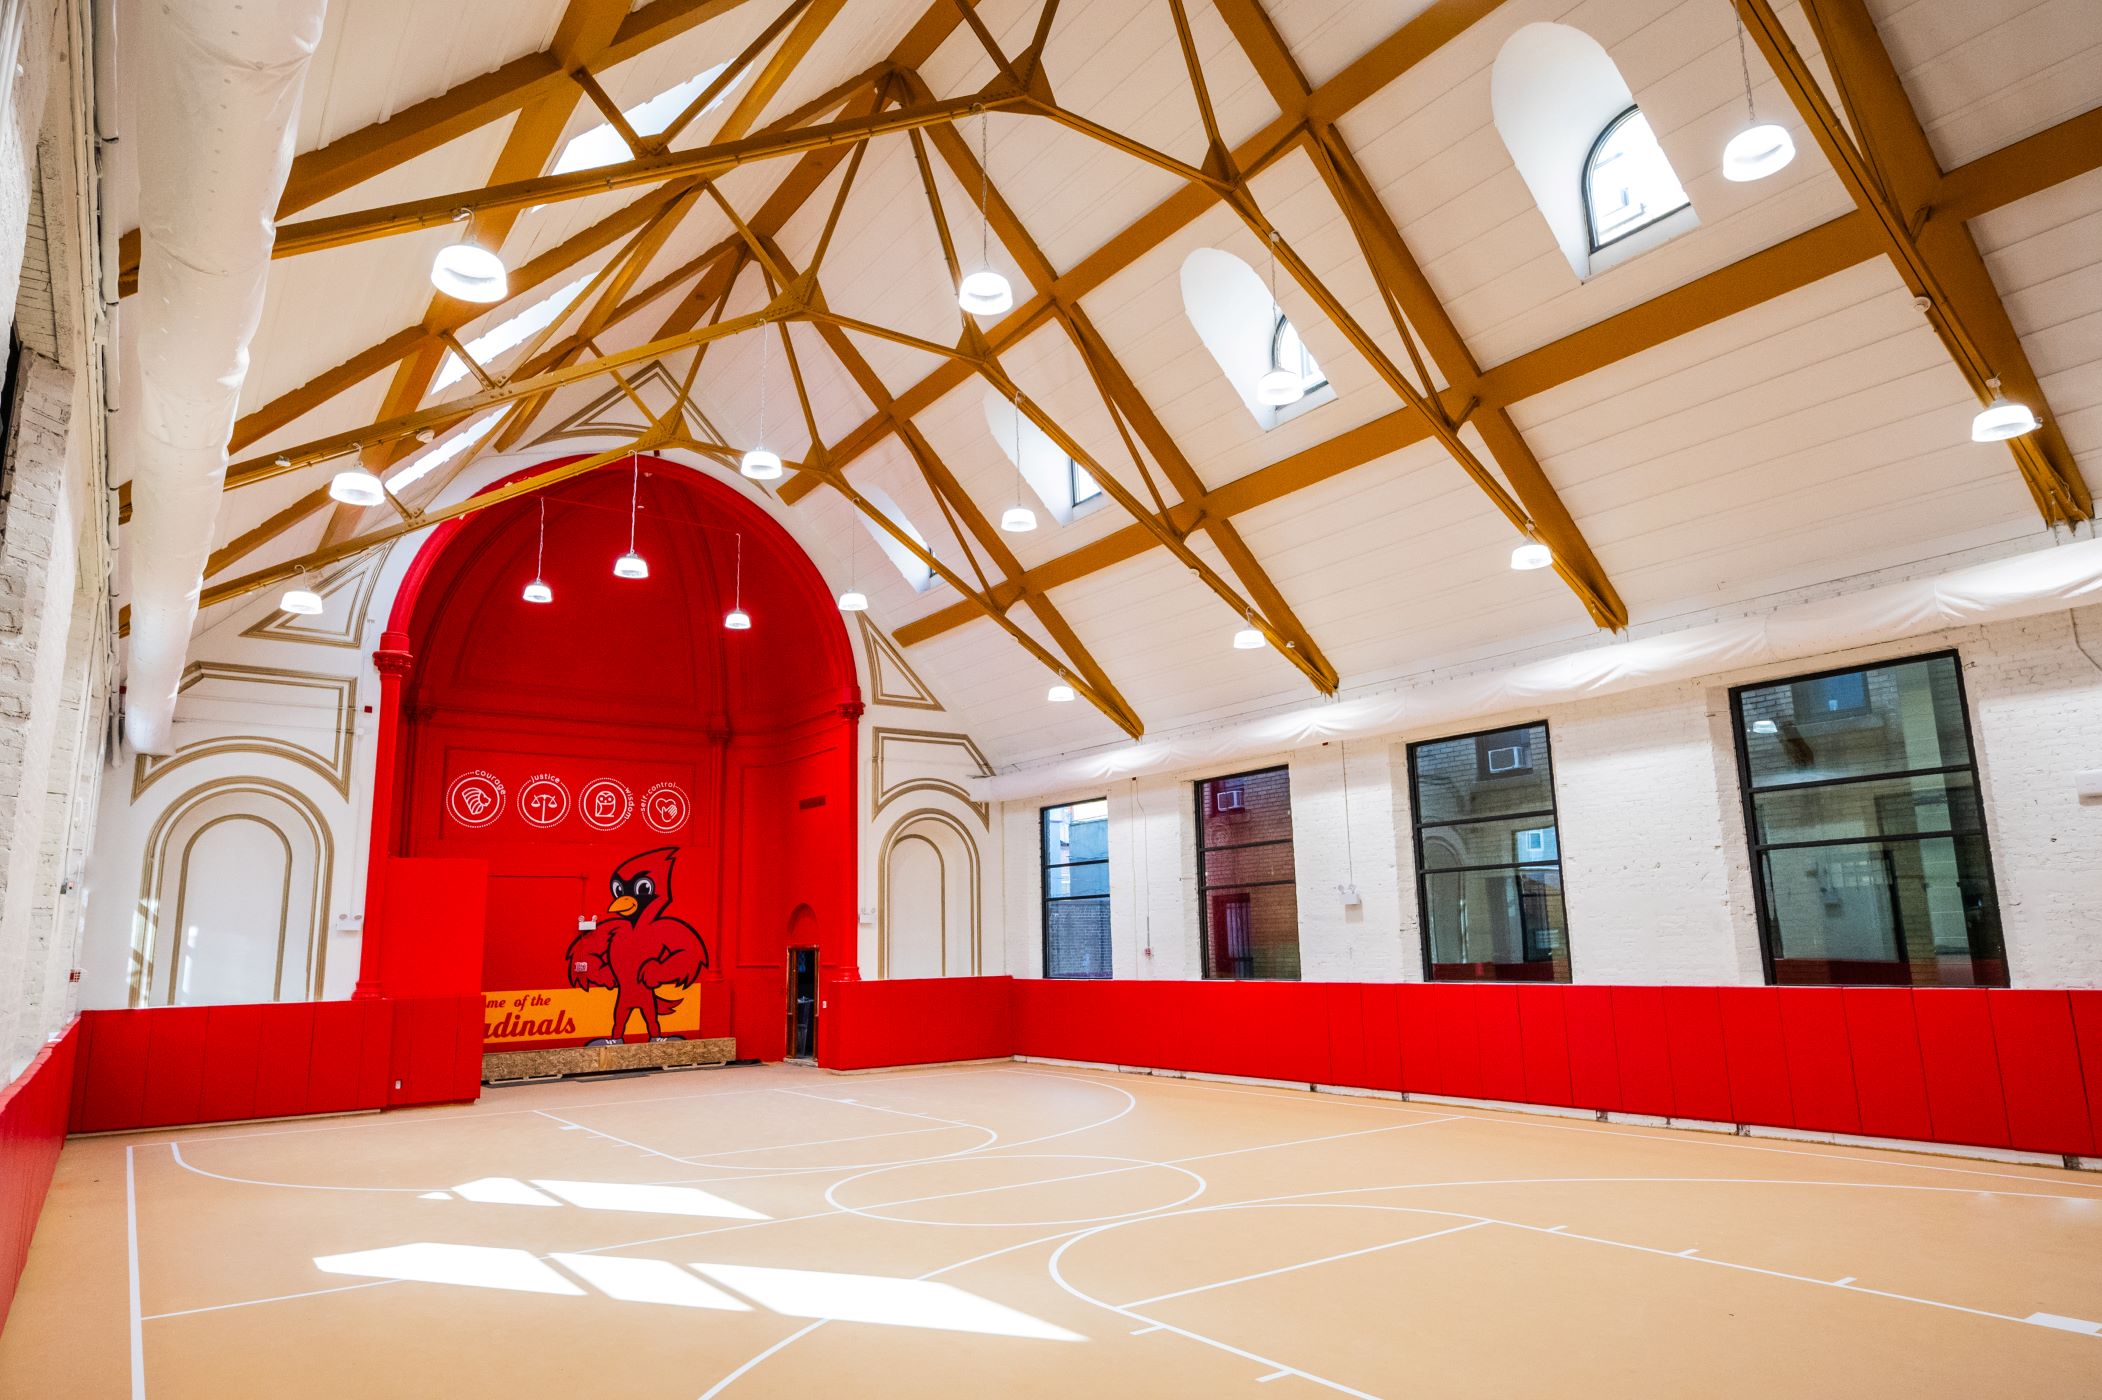 Church converted to gym with red accents